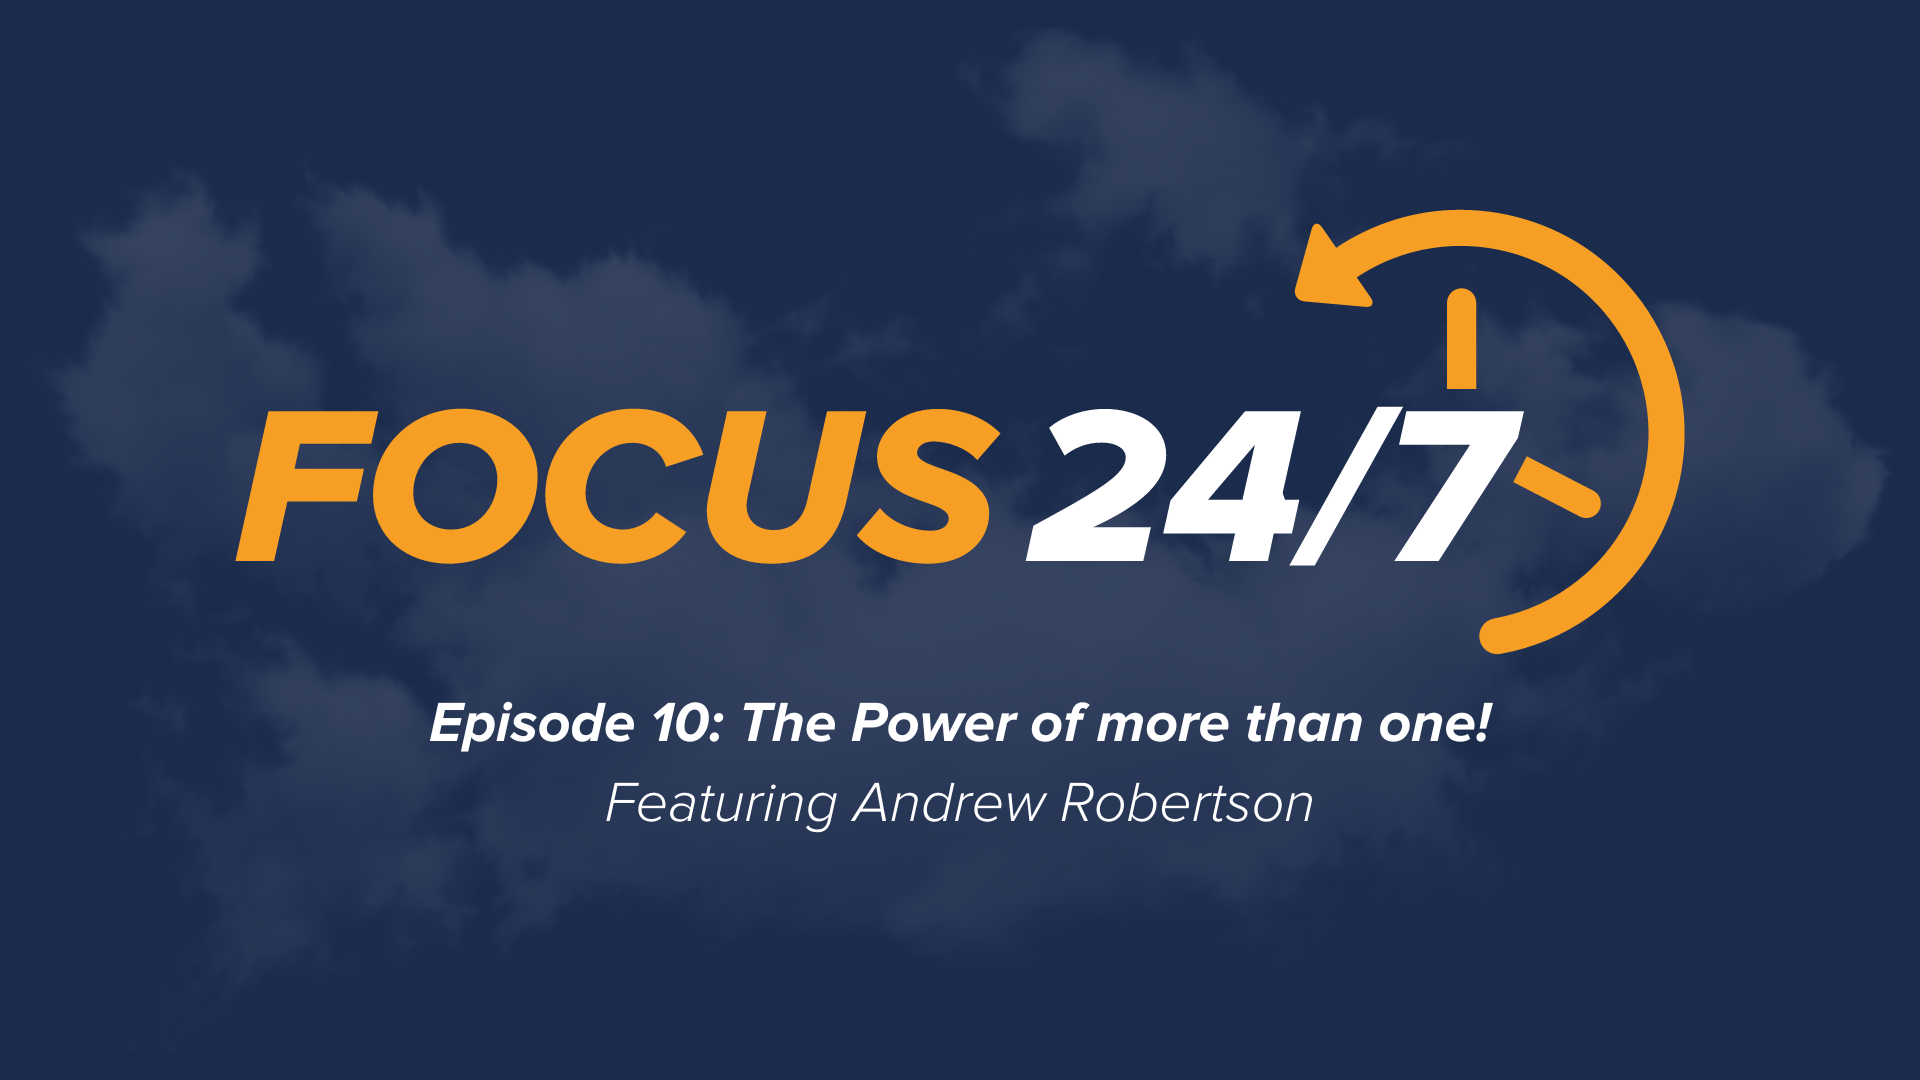 Focus 24/7 | Episode #10 | Andrew Robertson - The Power of more than one!